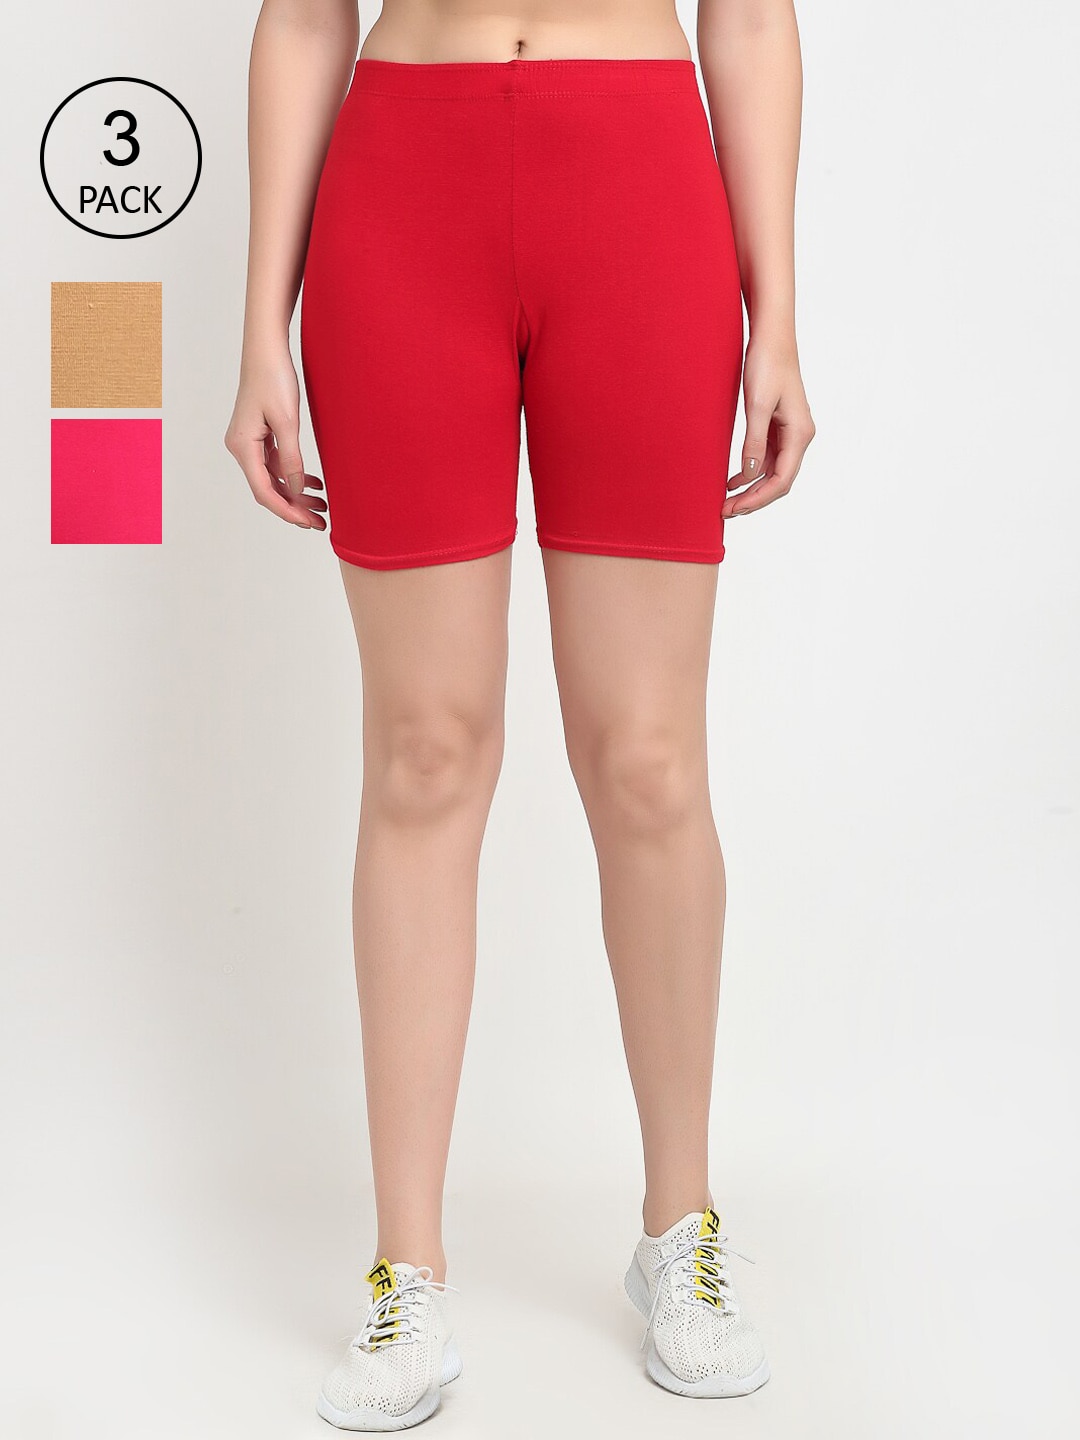 GRACIT Women Red Cycling Sports Shorts Price in India